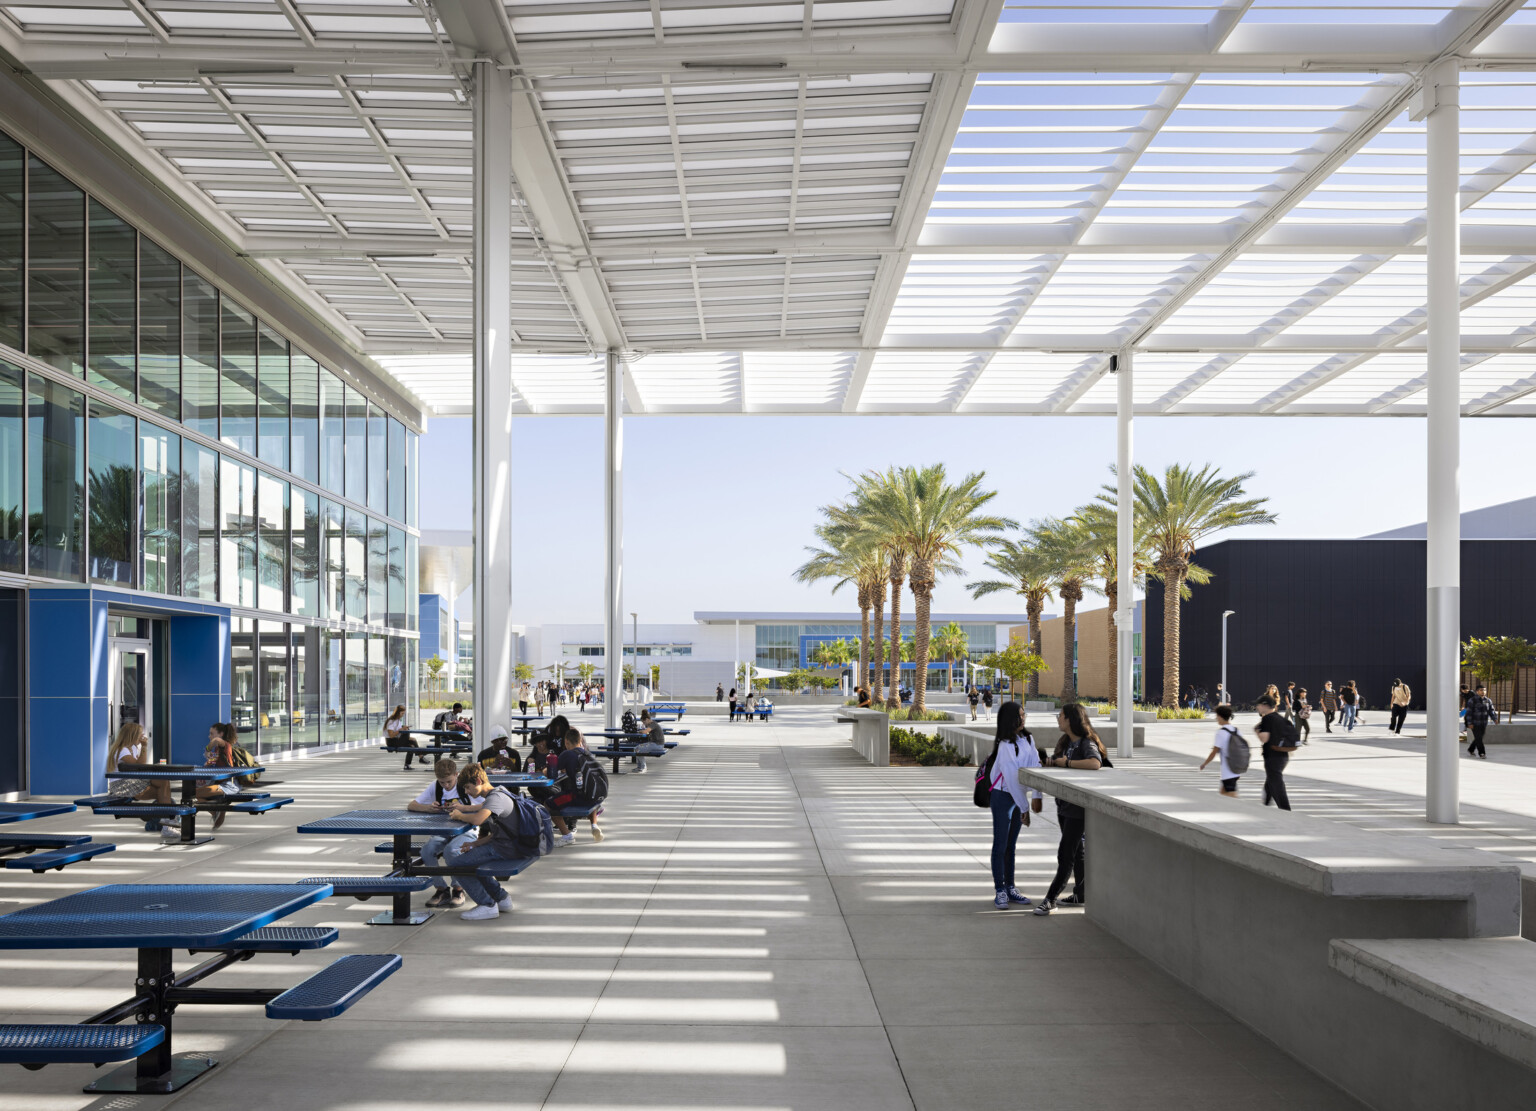 Outdoor seating area with white canopy overhead. Glass wall left with blue accent around doors. View of courtyard and palm trees